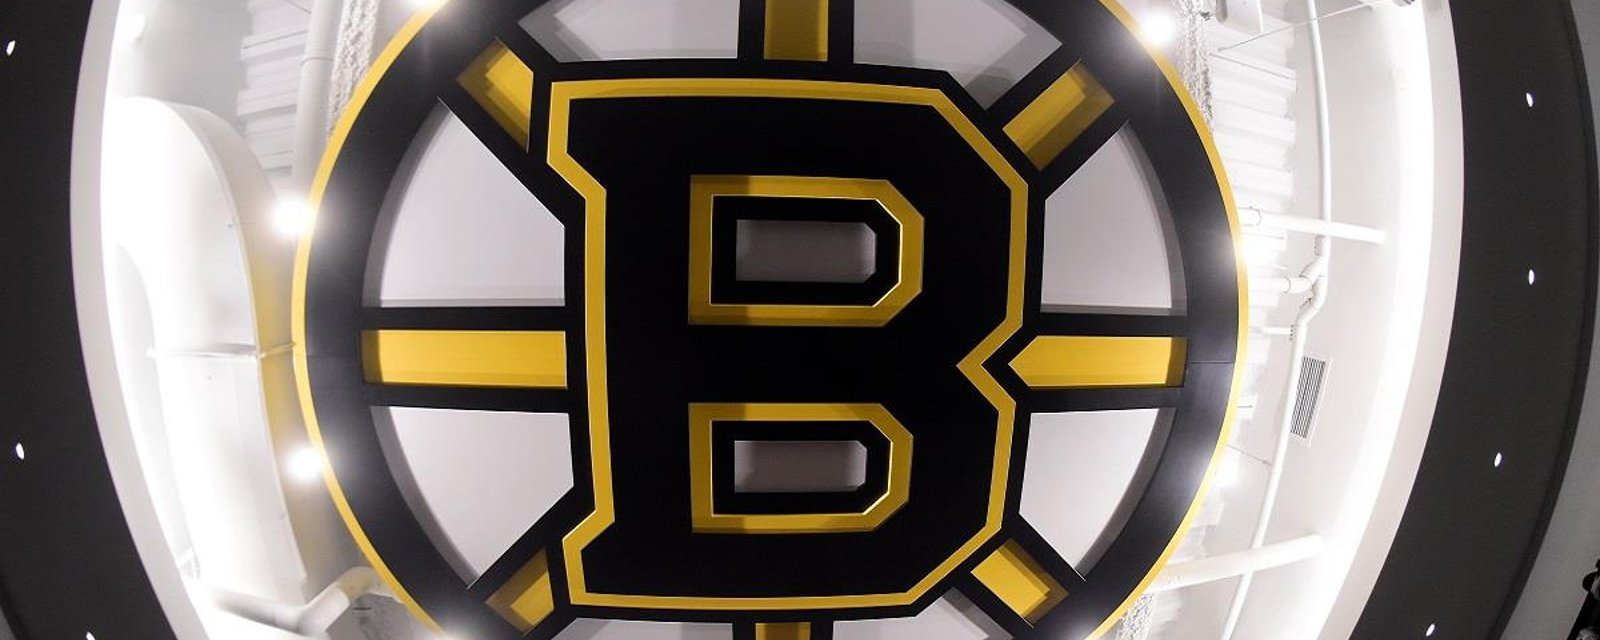 New look for the Bruins